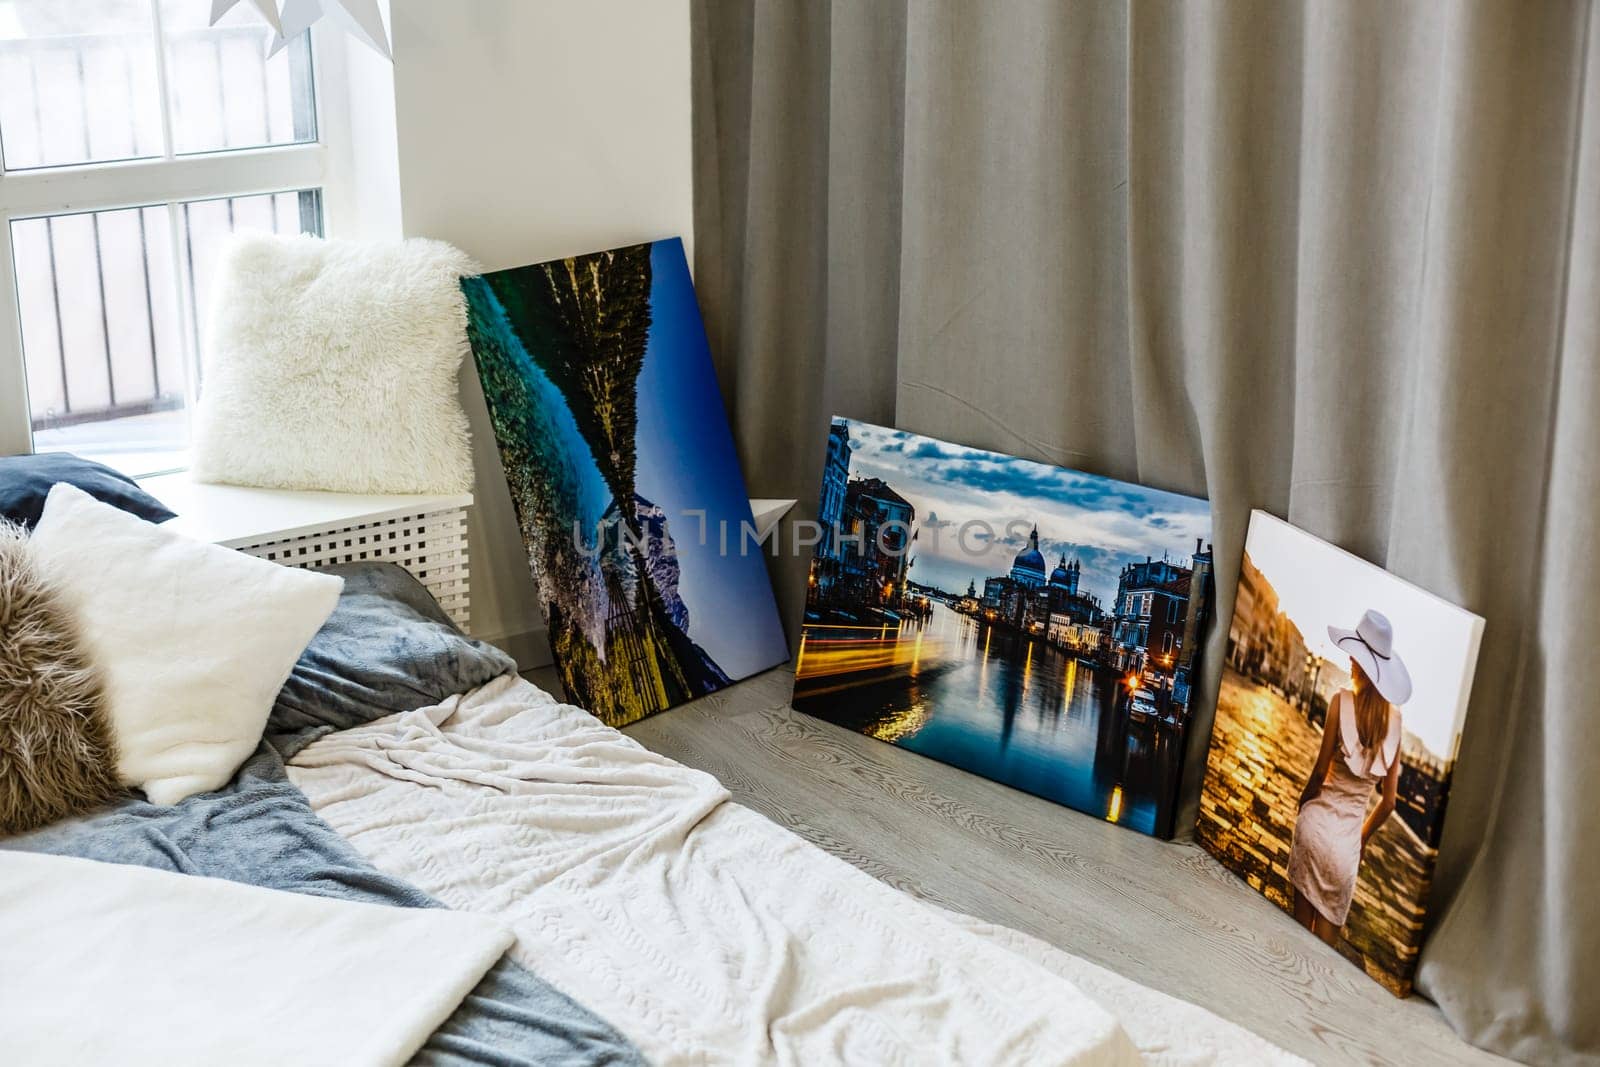 Canvas print in the room. Photo with gallery wrap method of canvas stretching on stretcher bar. Interior decor.